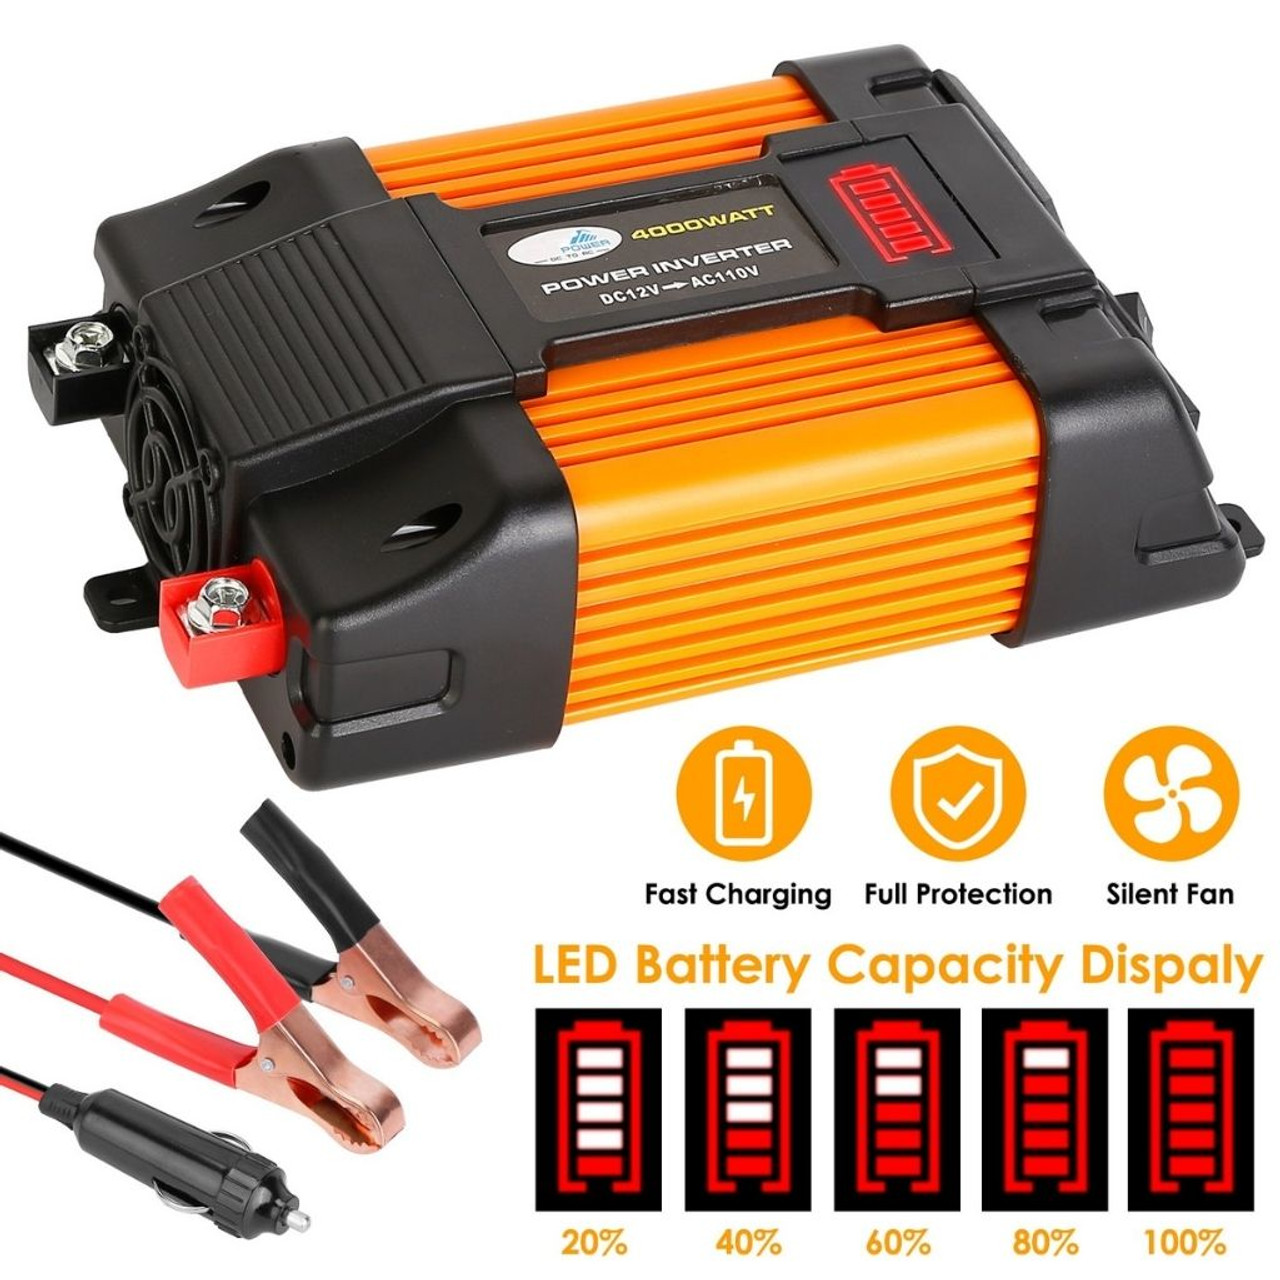 iMounTEK® 500W Car Power Inverter with USB and AC Outlets product image